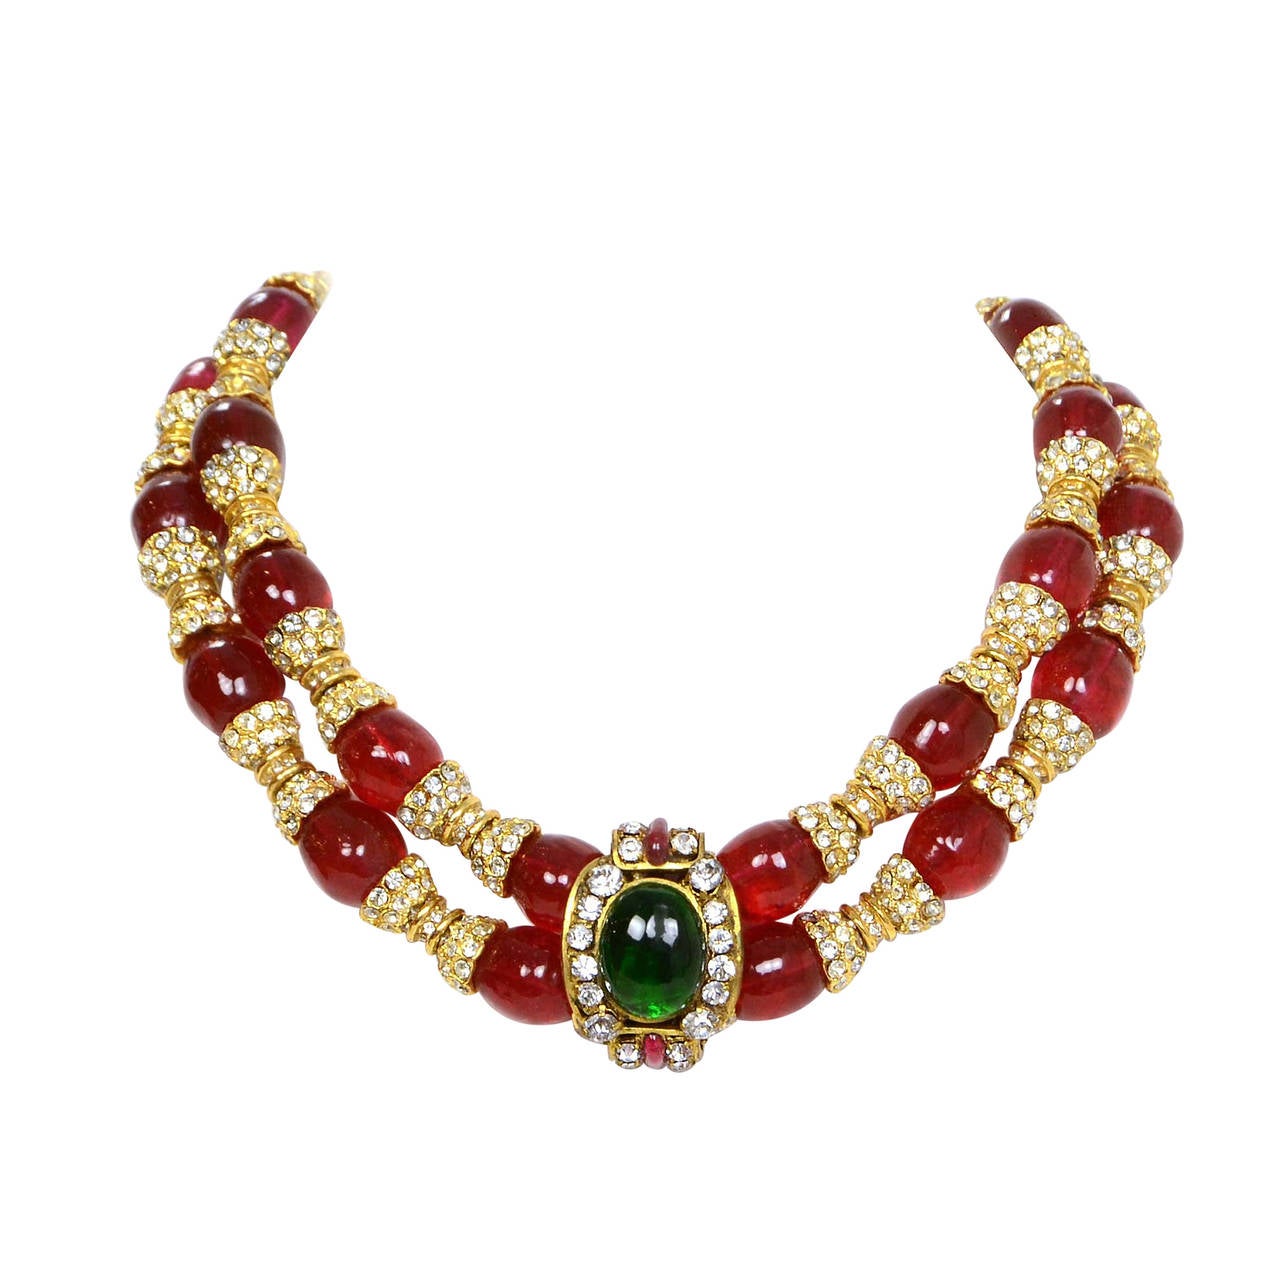 Chanel Vintage '83 Red Gripoix and Rhinestone Double Tier Necklace
Features green gripoix and rhinestone pendant at center
Made in: France
Year of Production: 1983
Stamp: Chanel CC 1983
Closure: Hook closure
Color: Red, green and